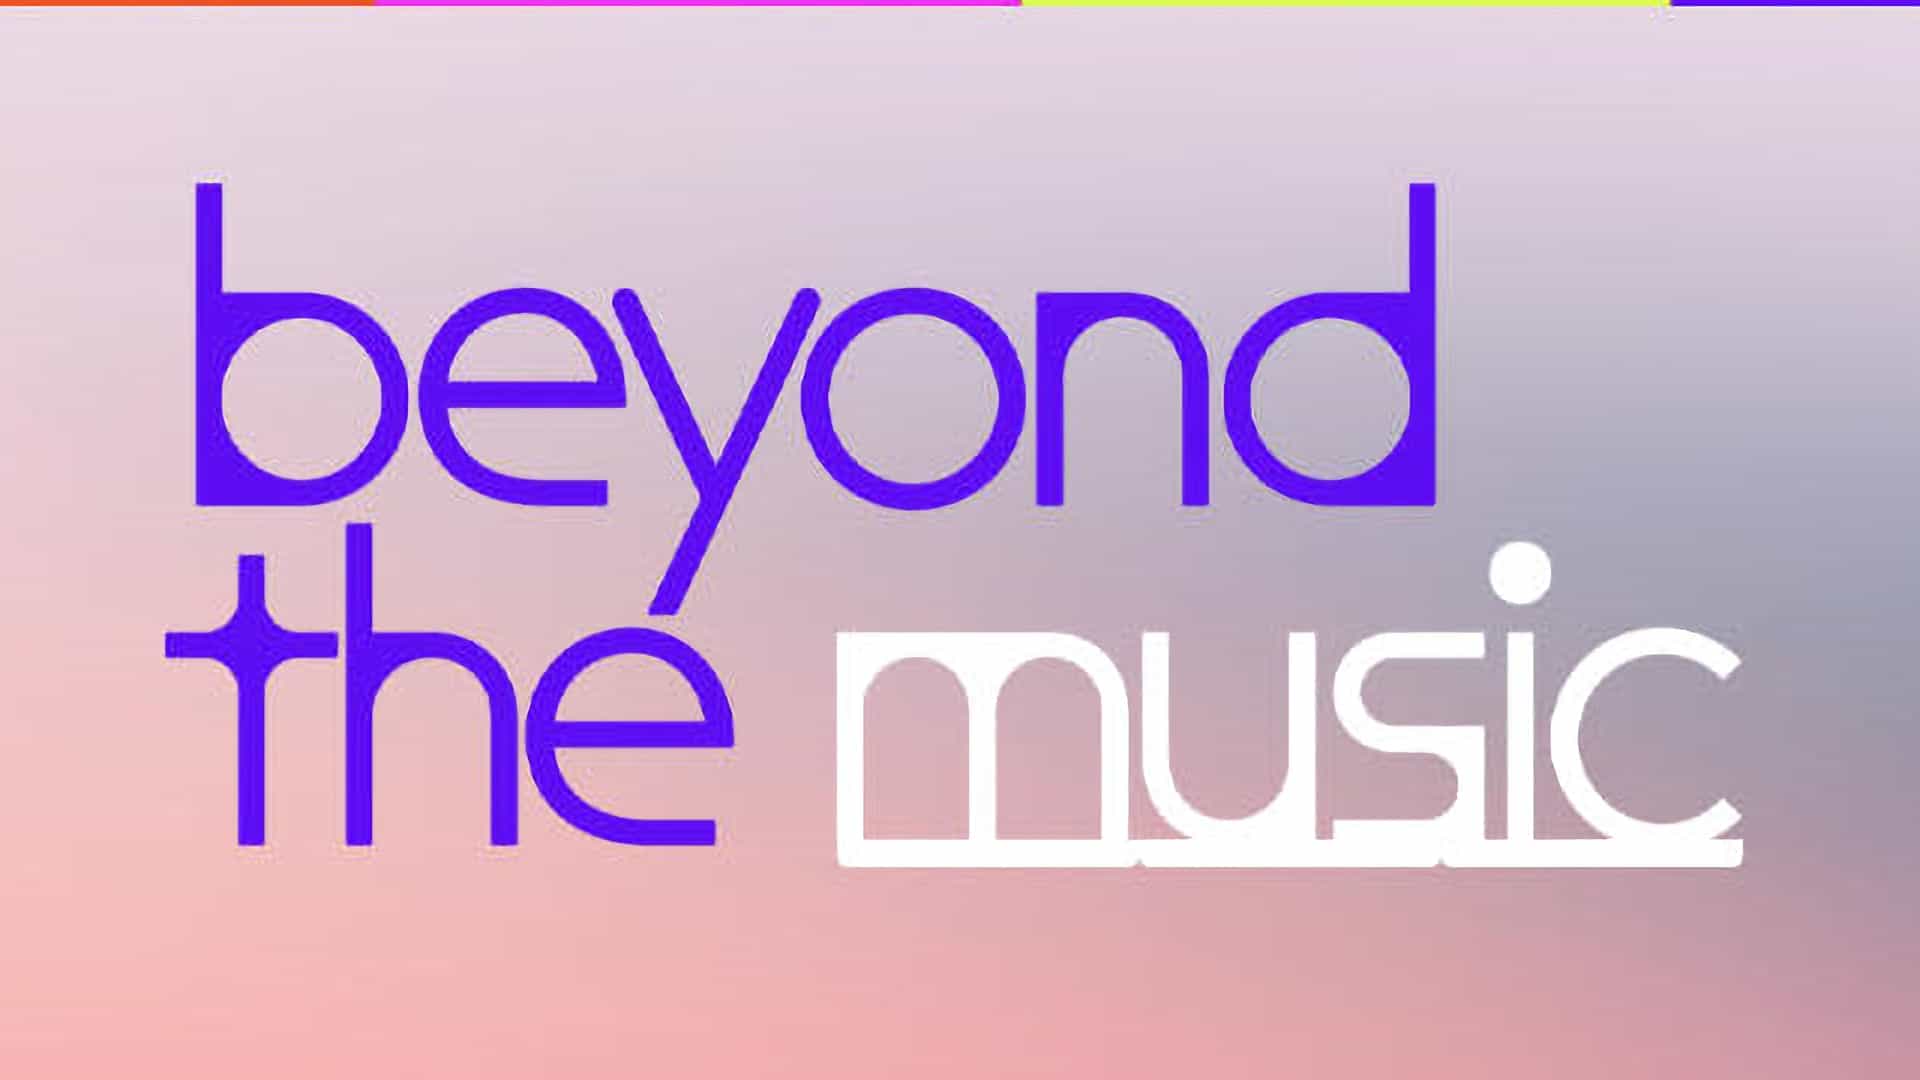 Beyond The Music - Inspire